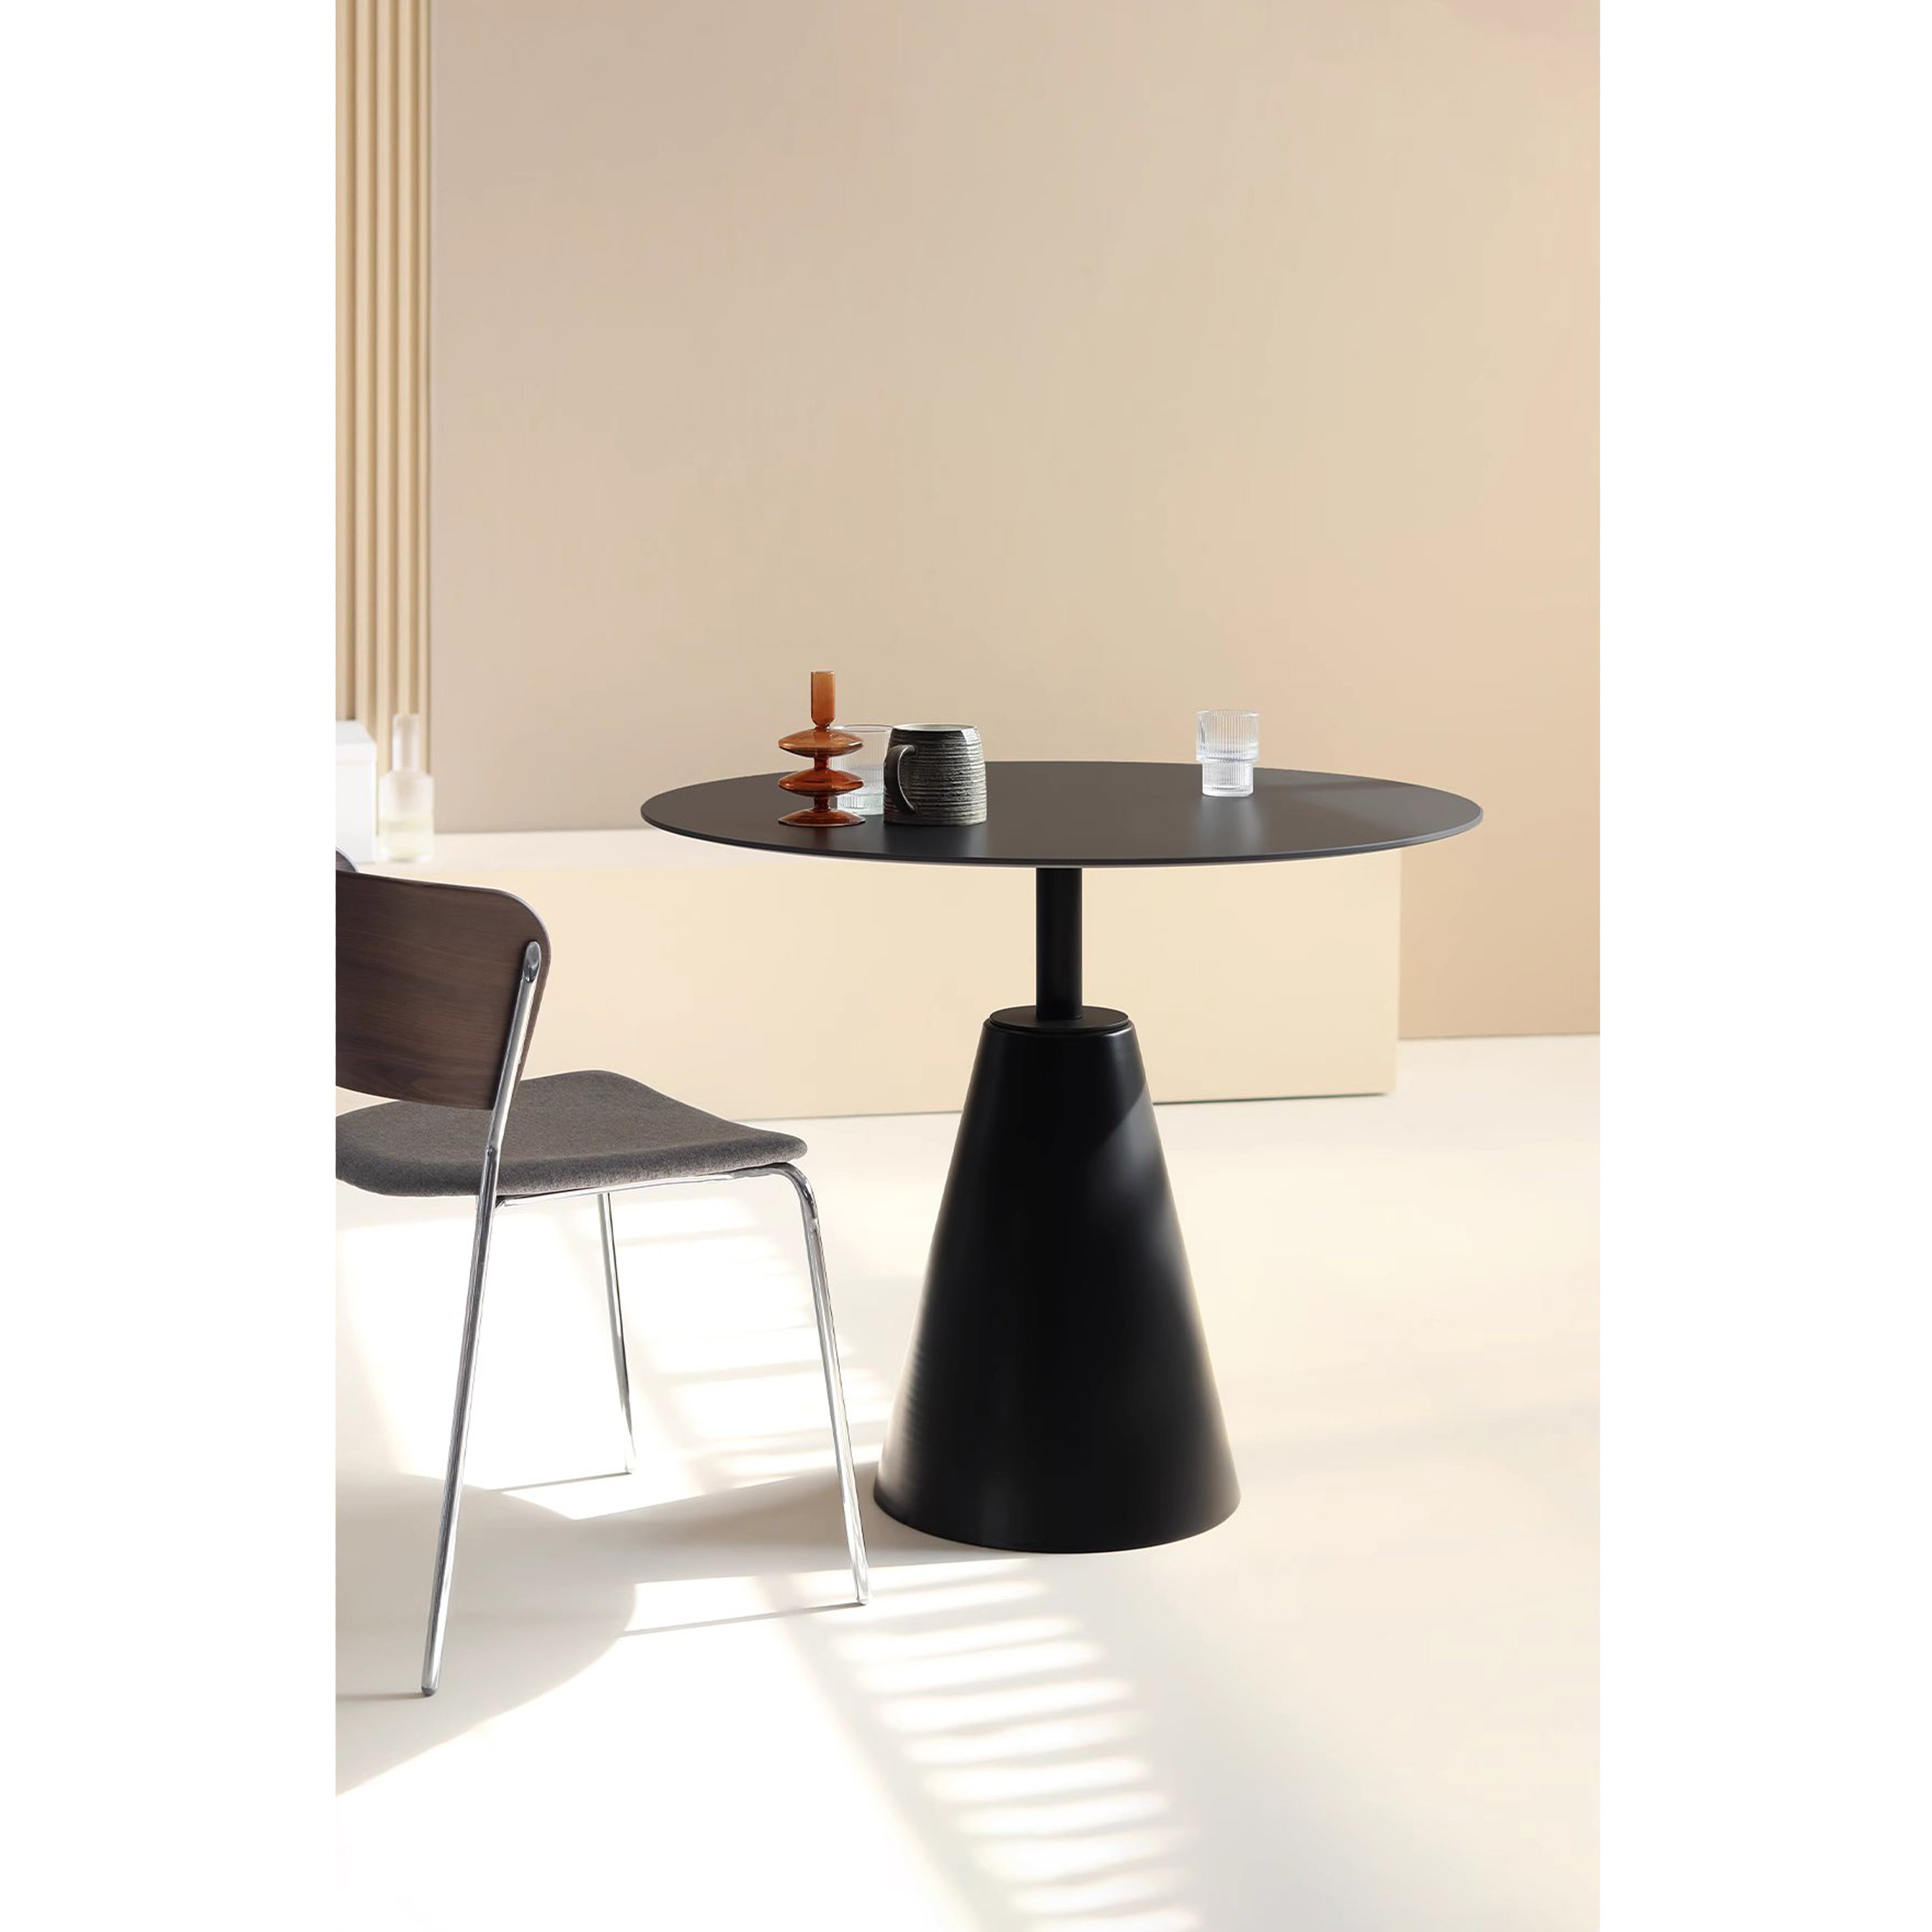 6.0 Table - Sintered Stone Dining Table (Dia600-1000mm)